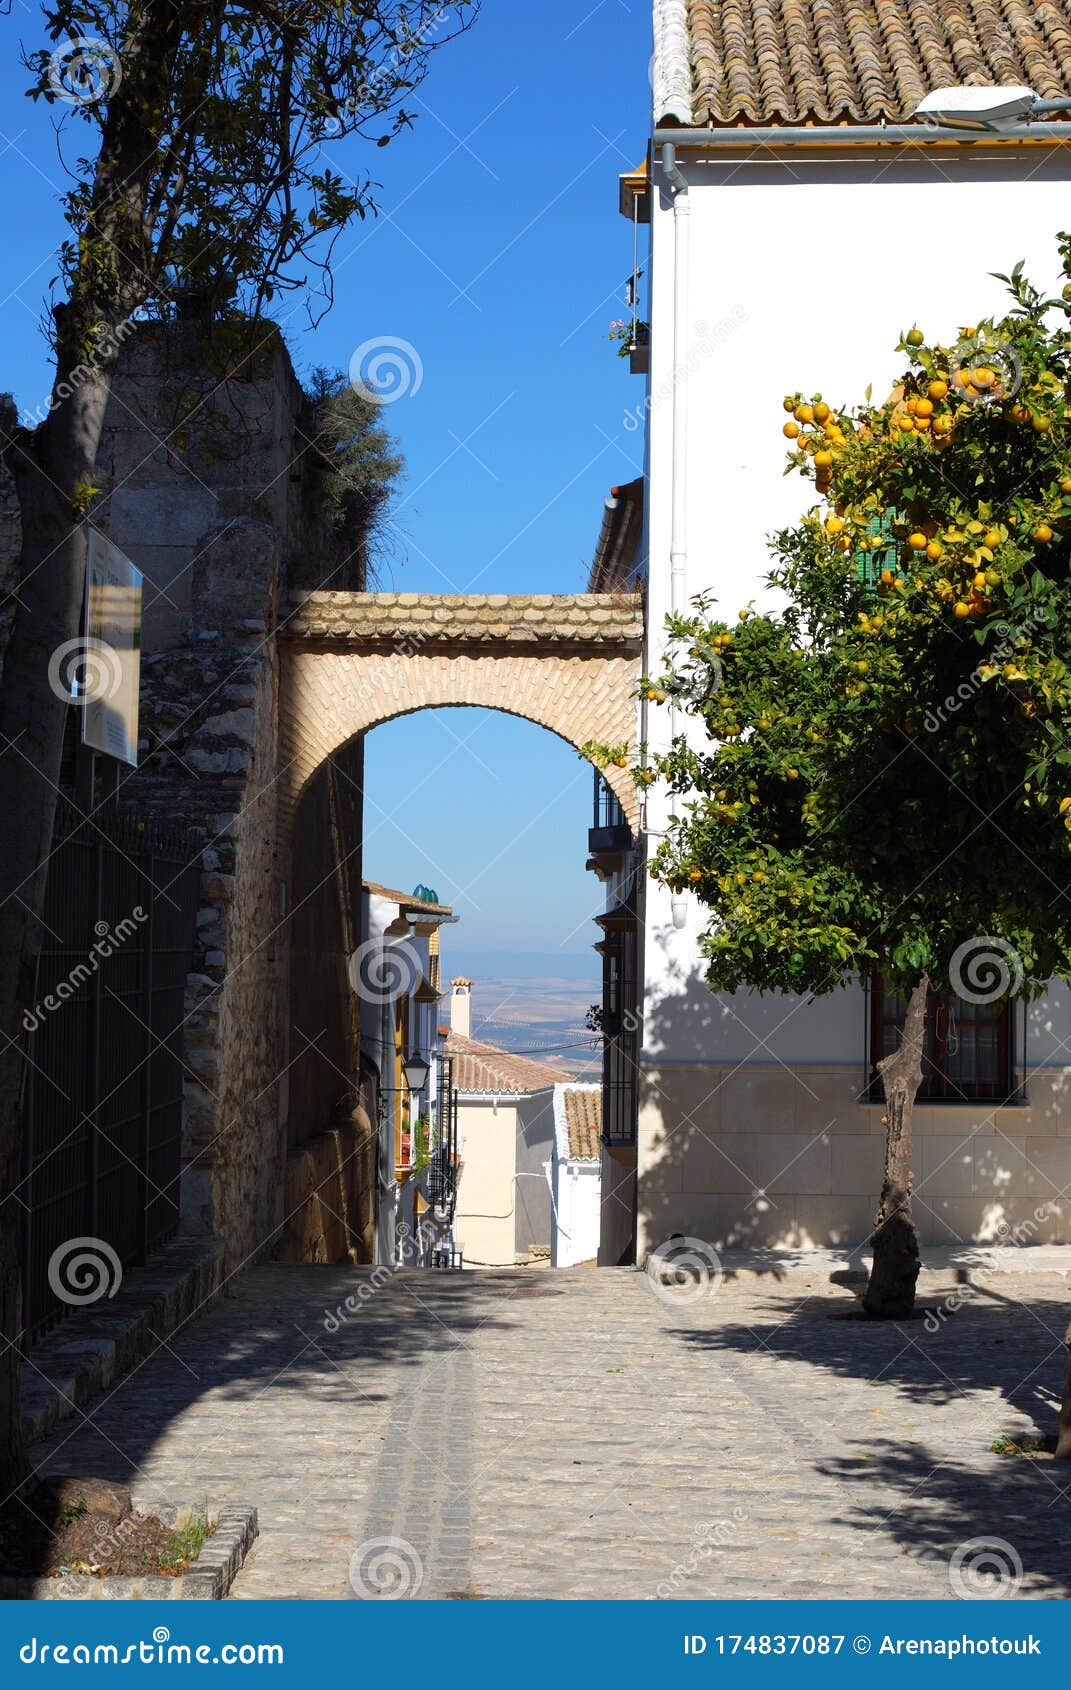 archway in town centre, estepa, spain.